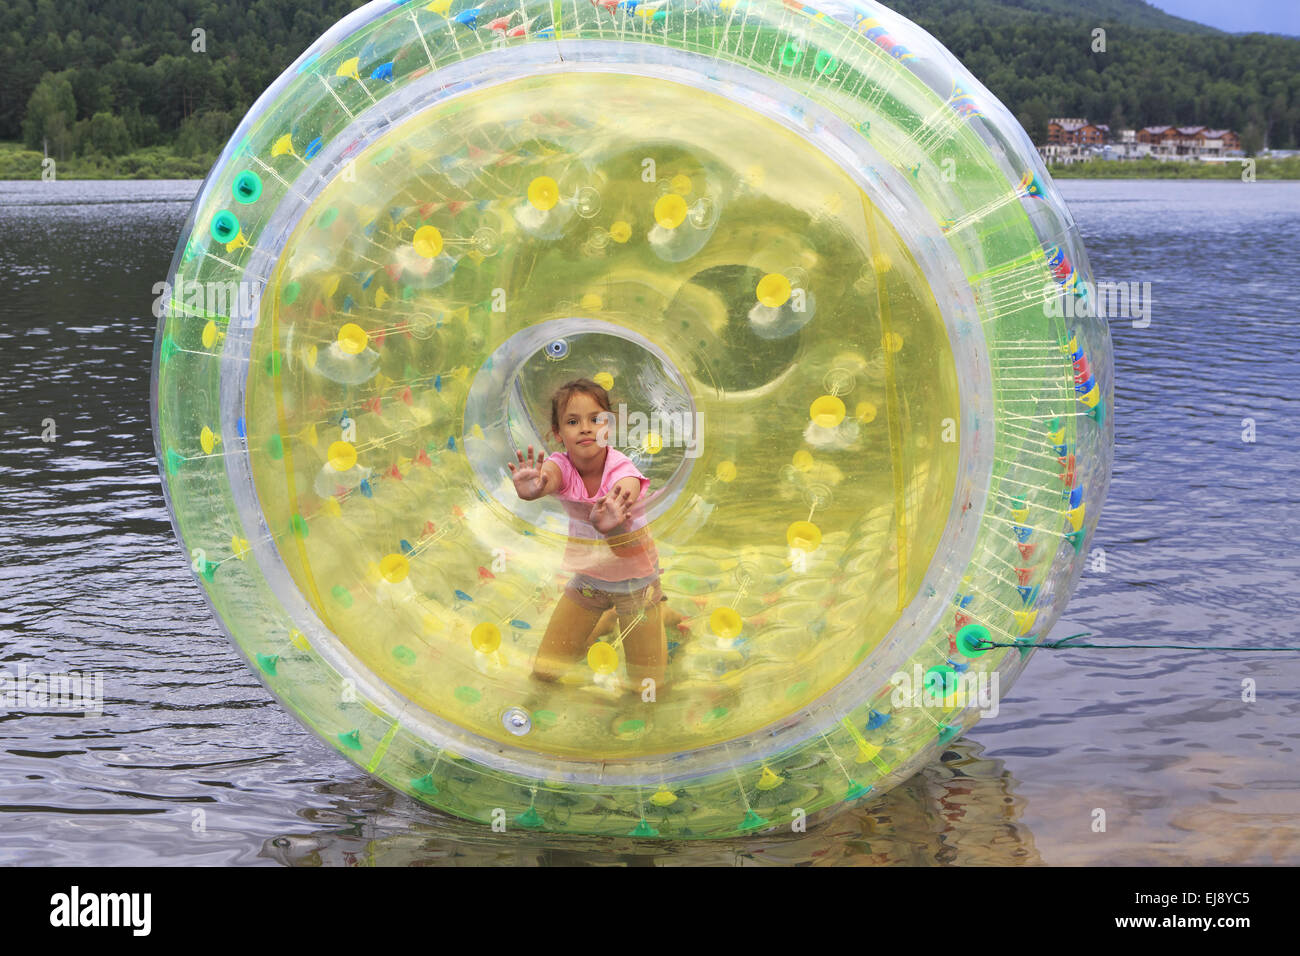 Child in inflatable attraction on the lake. Stock Photo